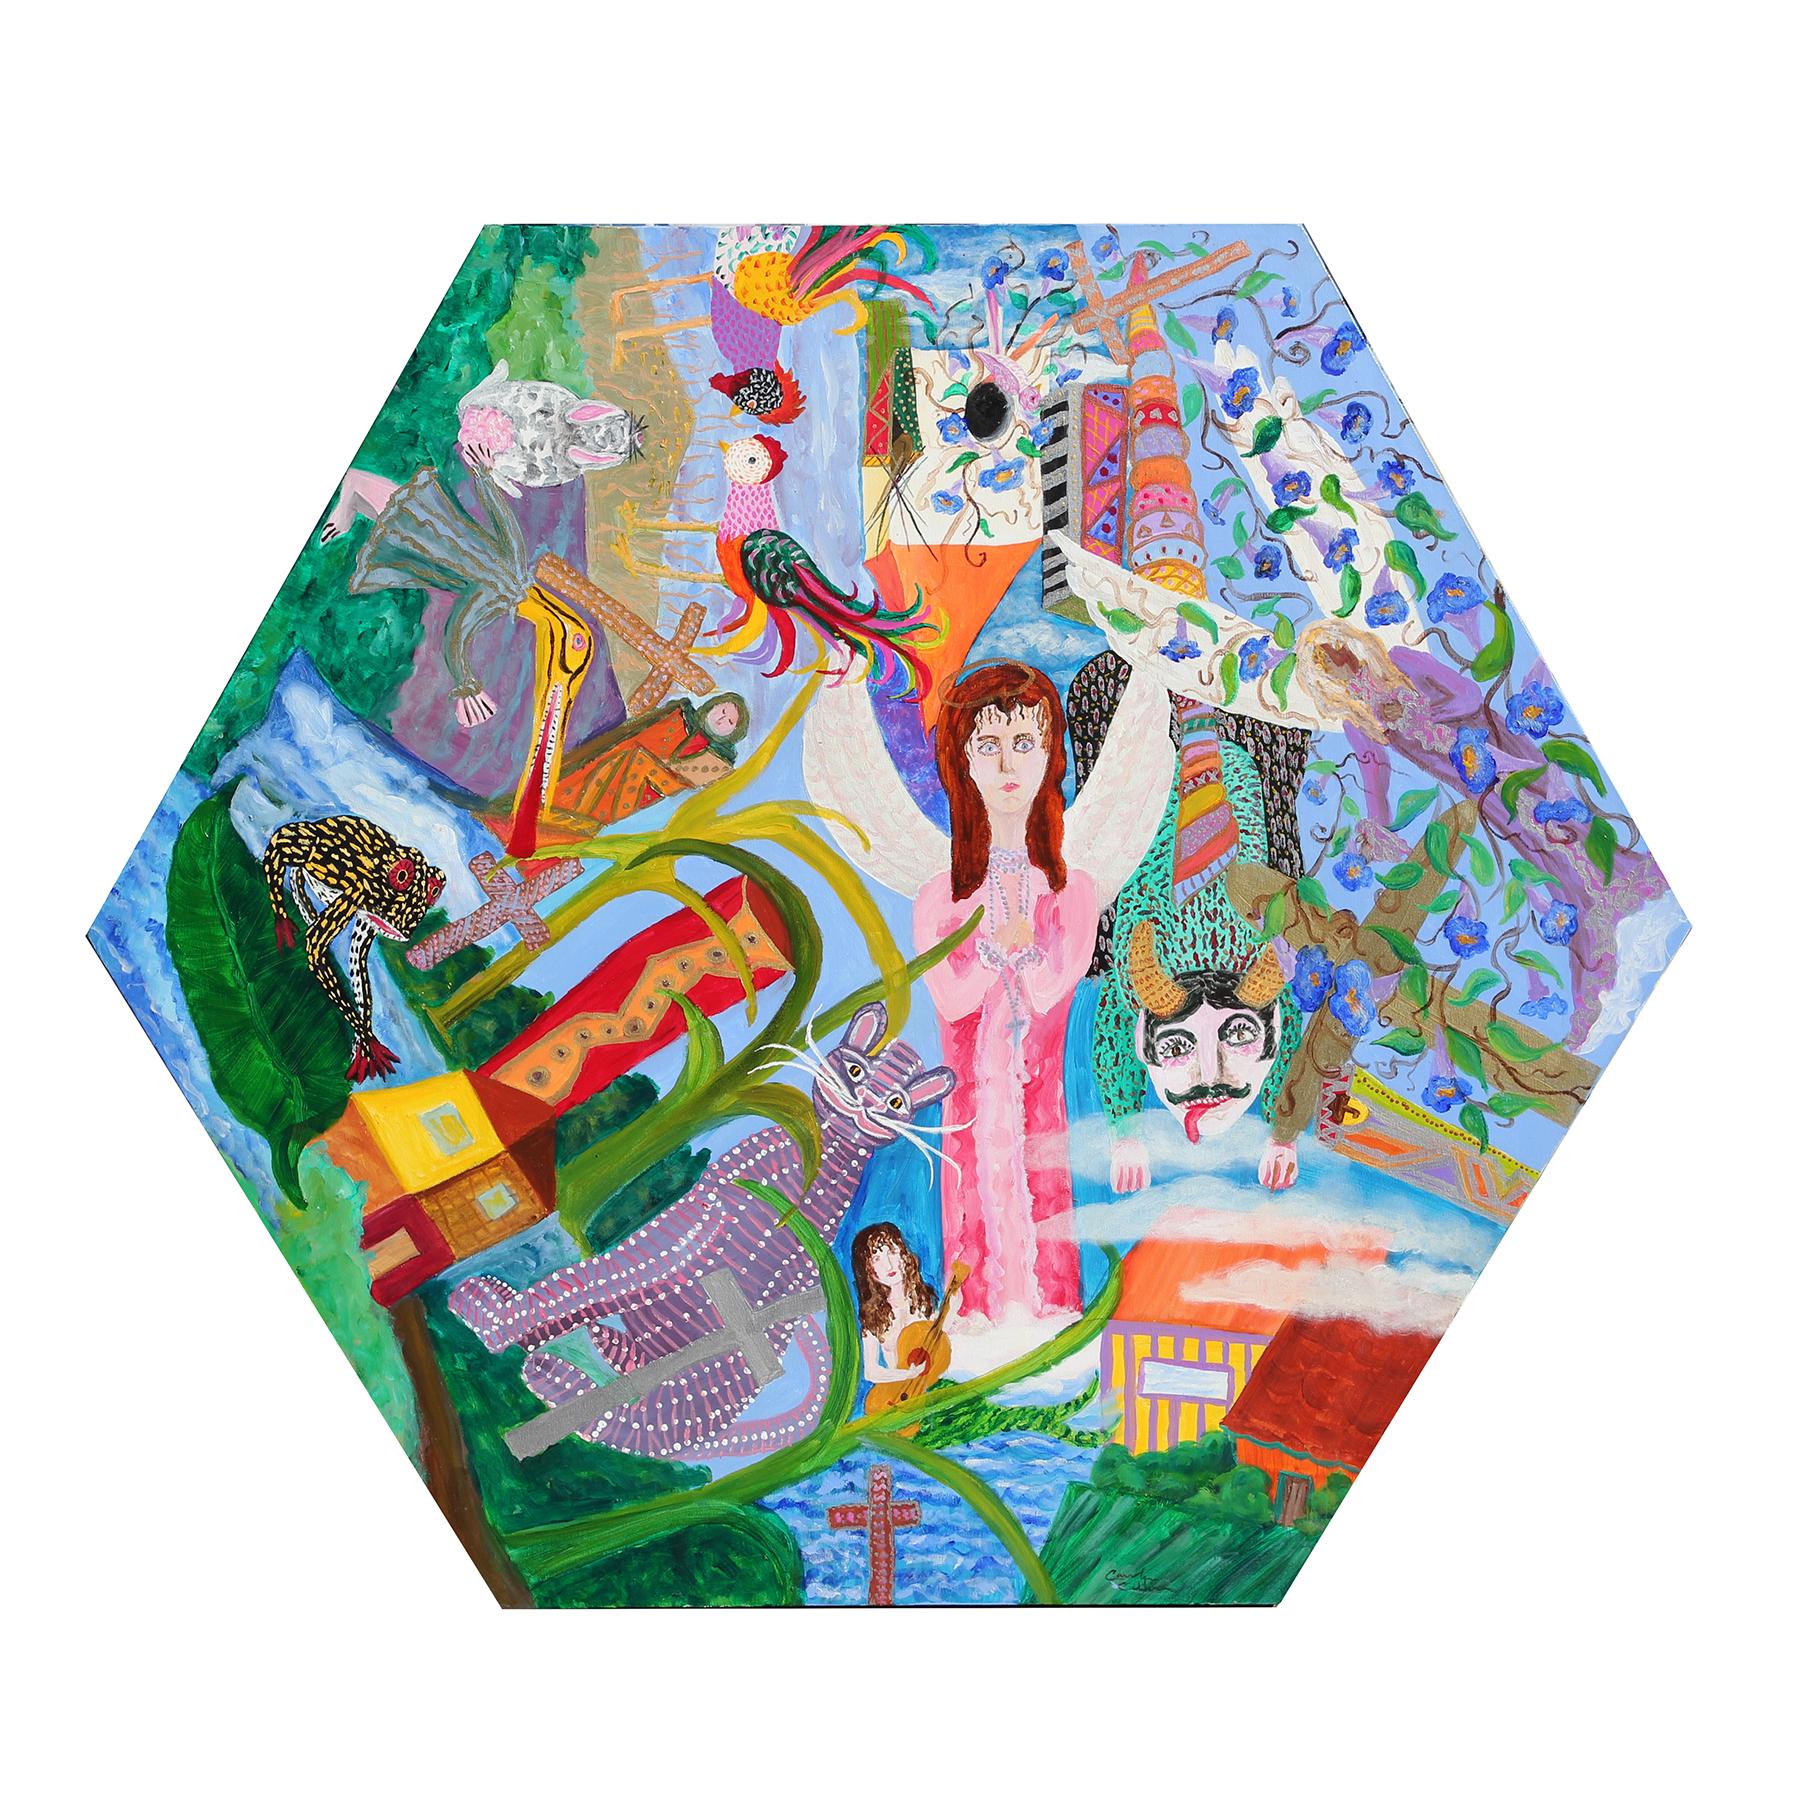 "Celebration of Life" Colorful Abstract Figurative Hexagon Canvas Painting 